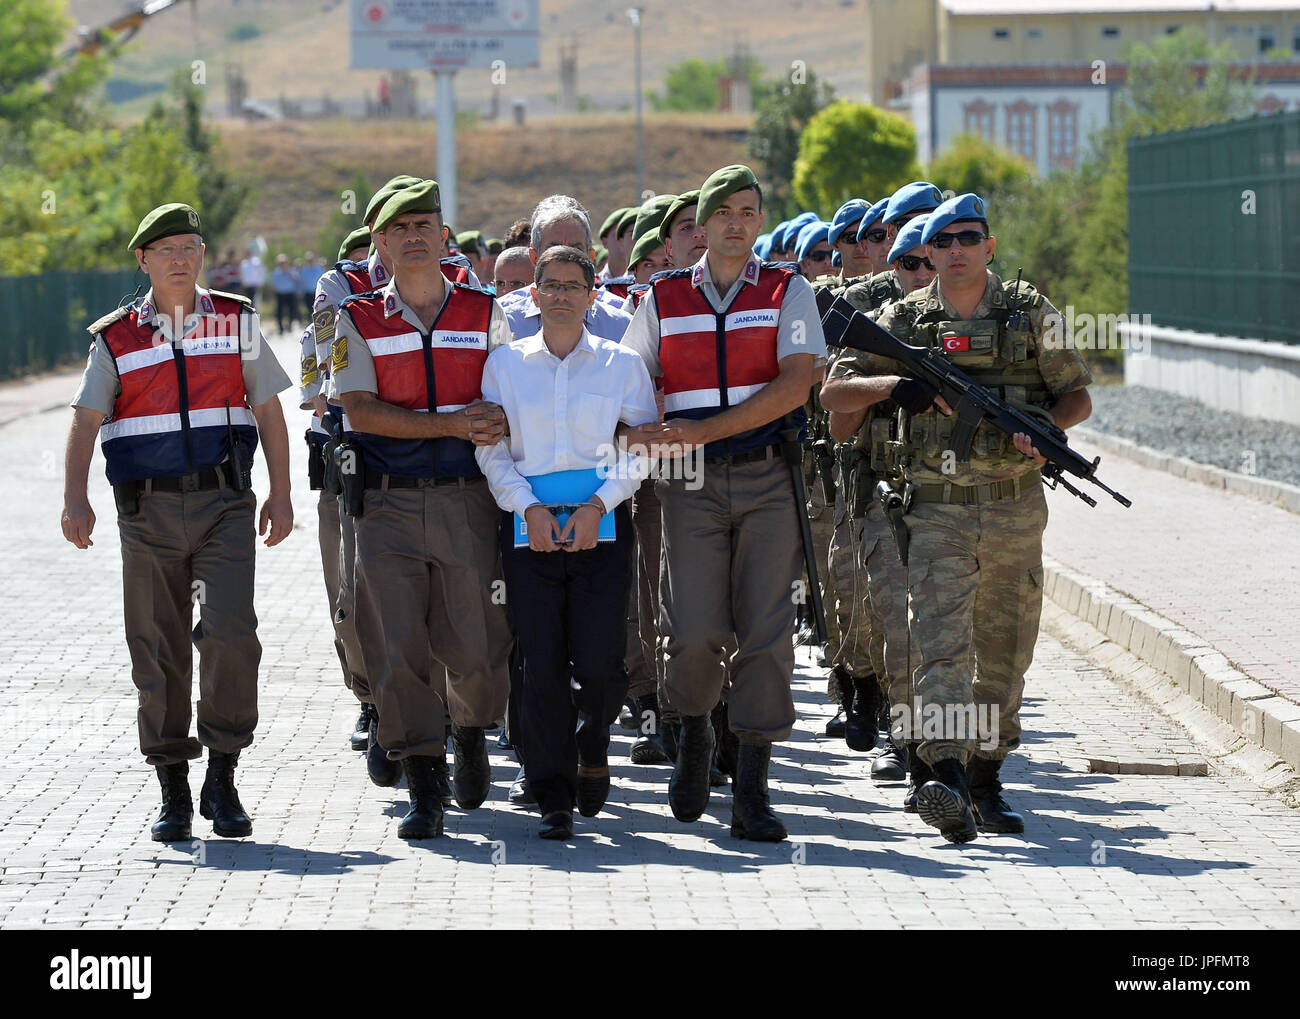 Ankara, Turkey. 1st Aug, 2017. Defendants escorted by gendarmerie arrive at the court for their trial in Sincan district, Ankara, capital of Turkey, on Aug. 1, 2017. A key trial over Turkey's coup attempt last year started under heavy security measures in Ankara on Tuesday, with 486 suspects accused of masterminding the coup facing justice. Credit: Xinhua/Alamy Live News Stock Photo